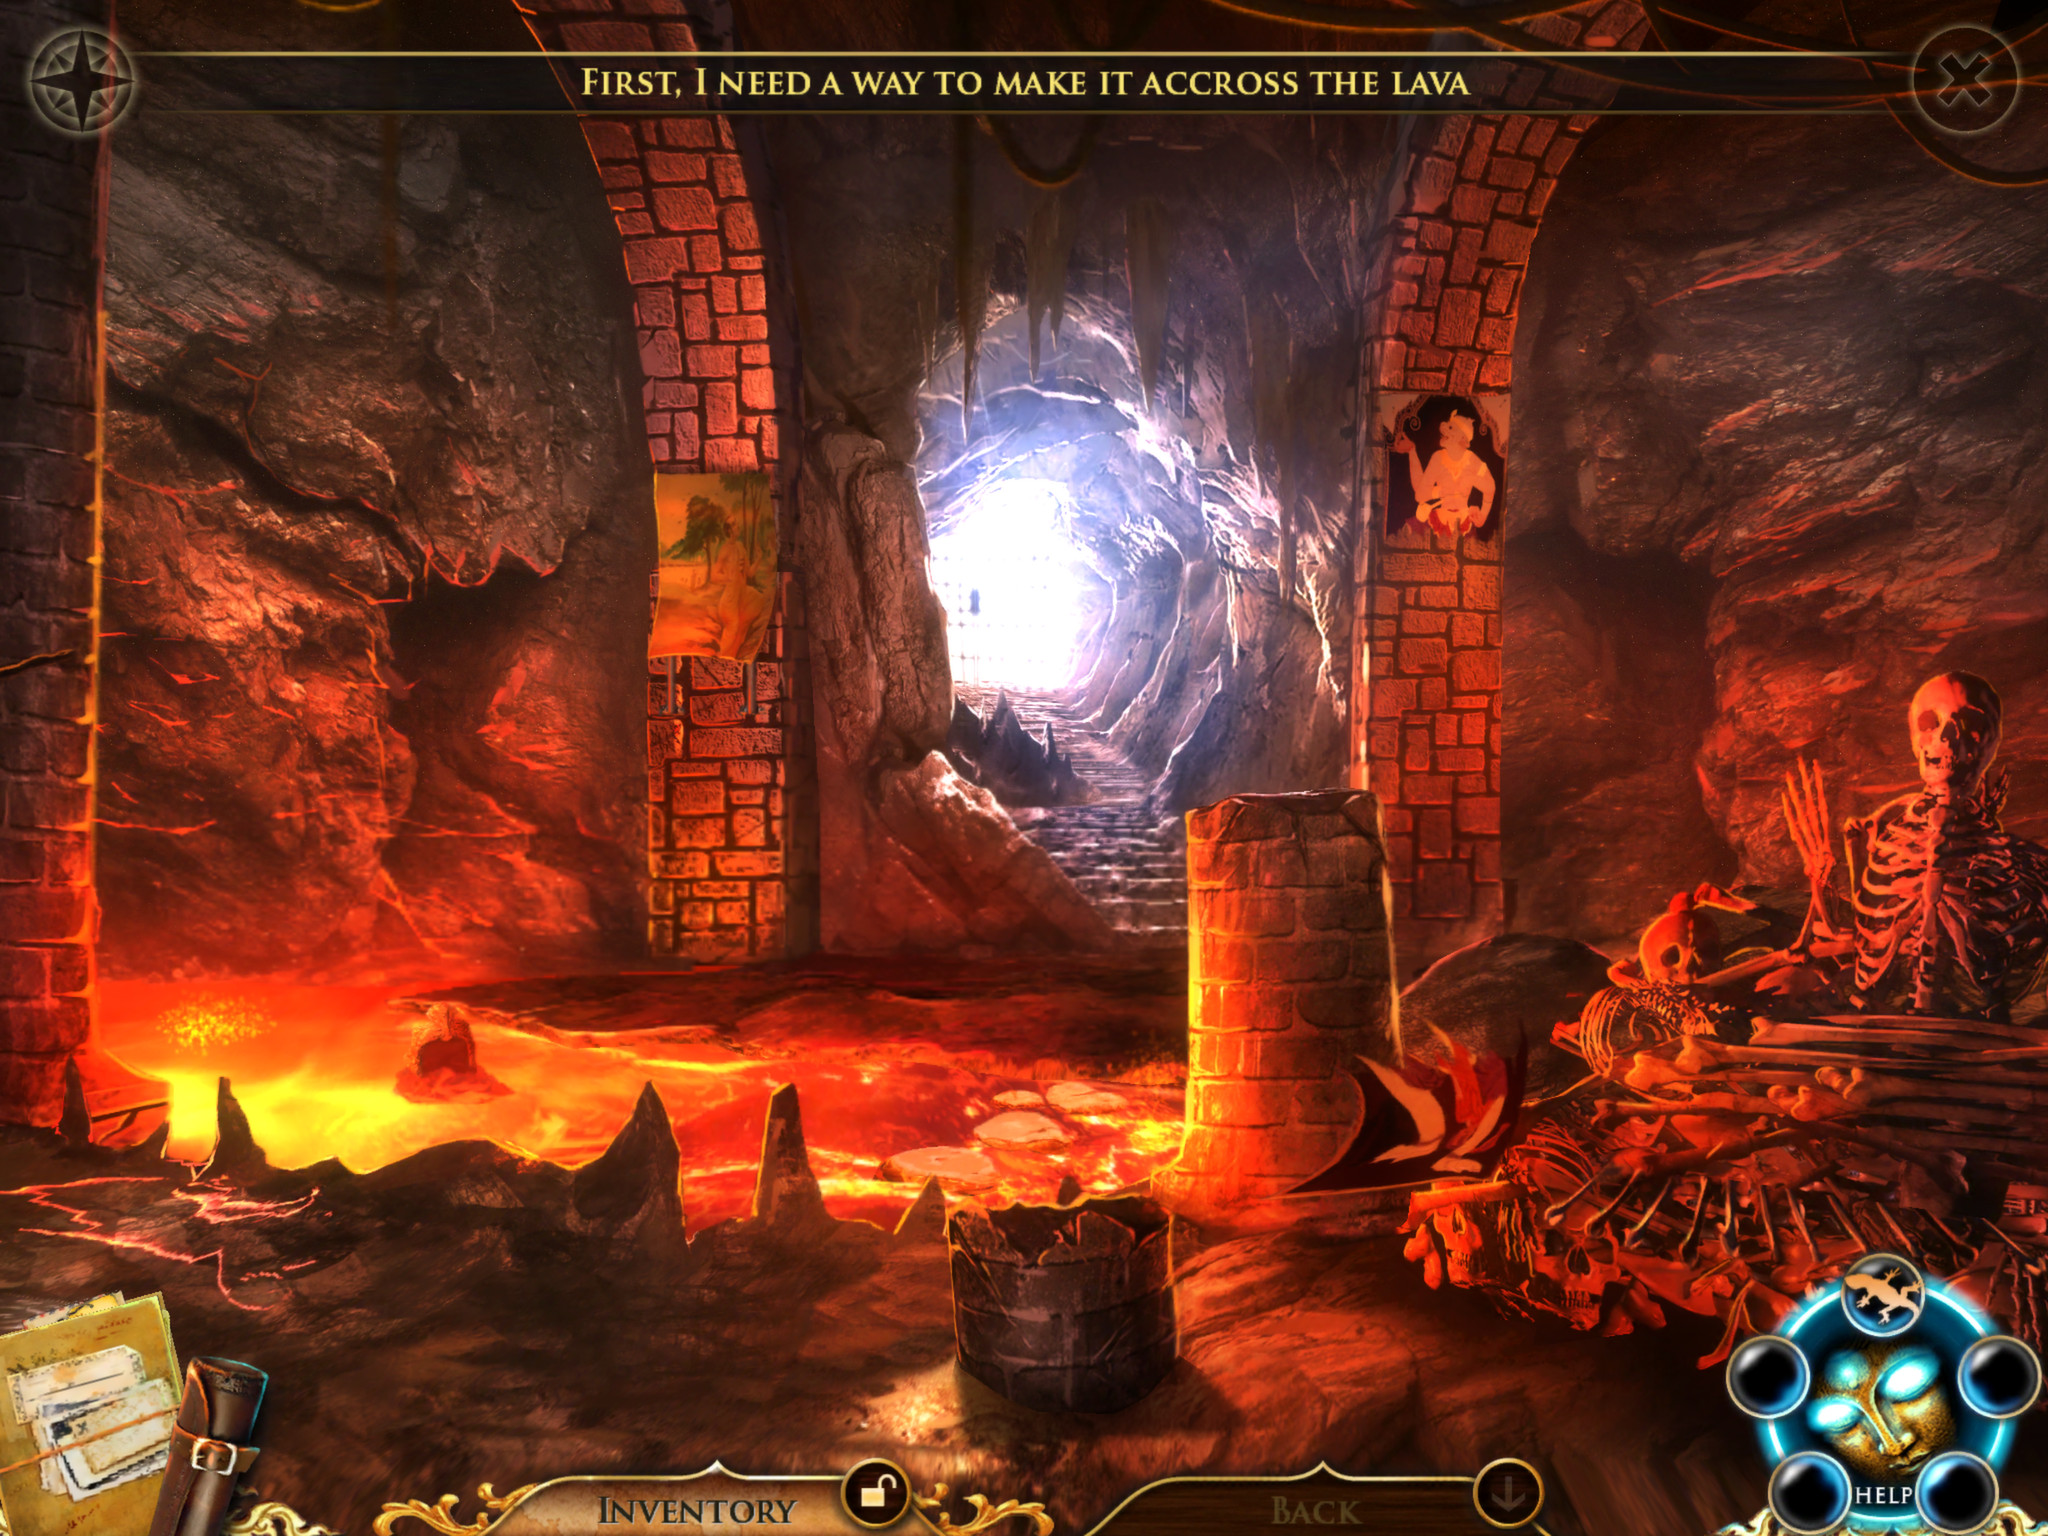 Melissa K. and the Heart of Gold Collector's Edition screenshot